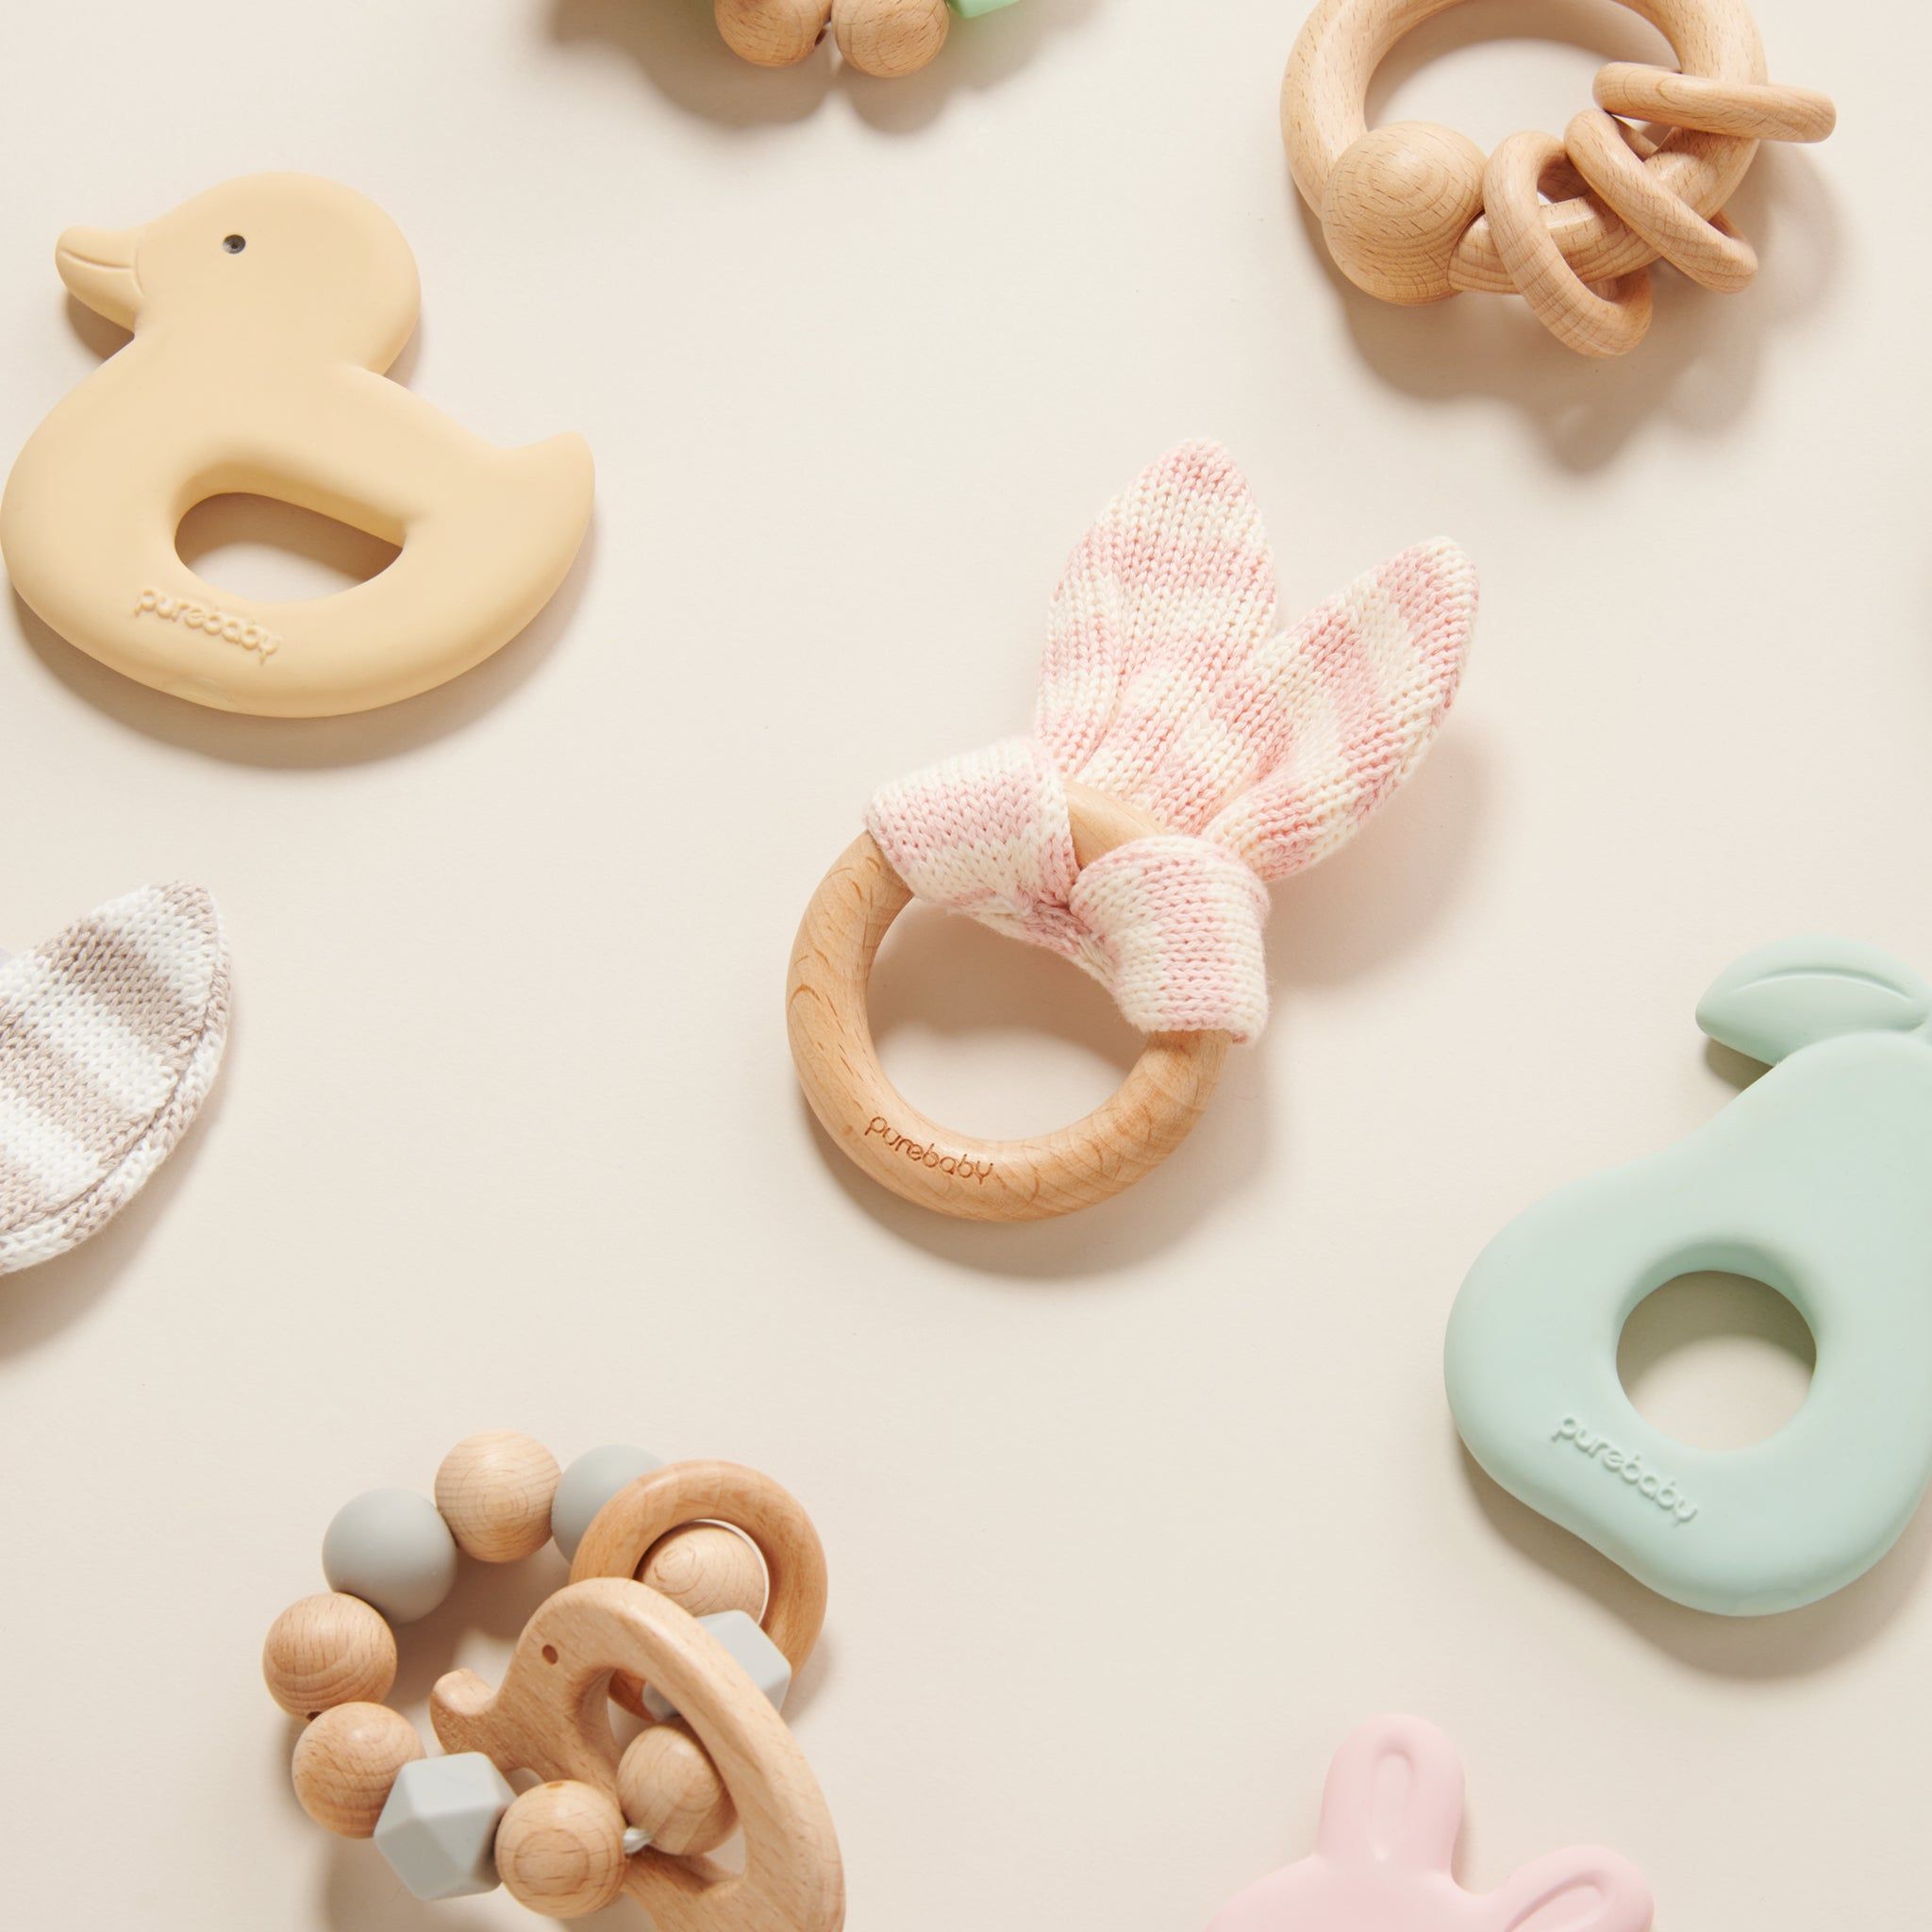 Selection of Teethers laying on floor